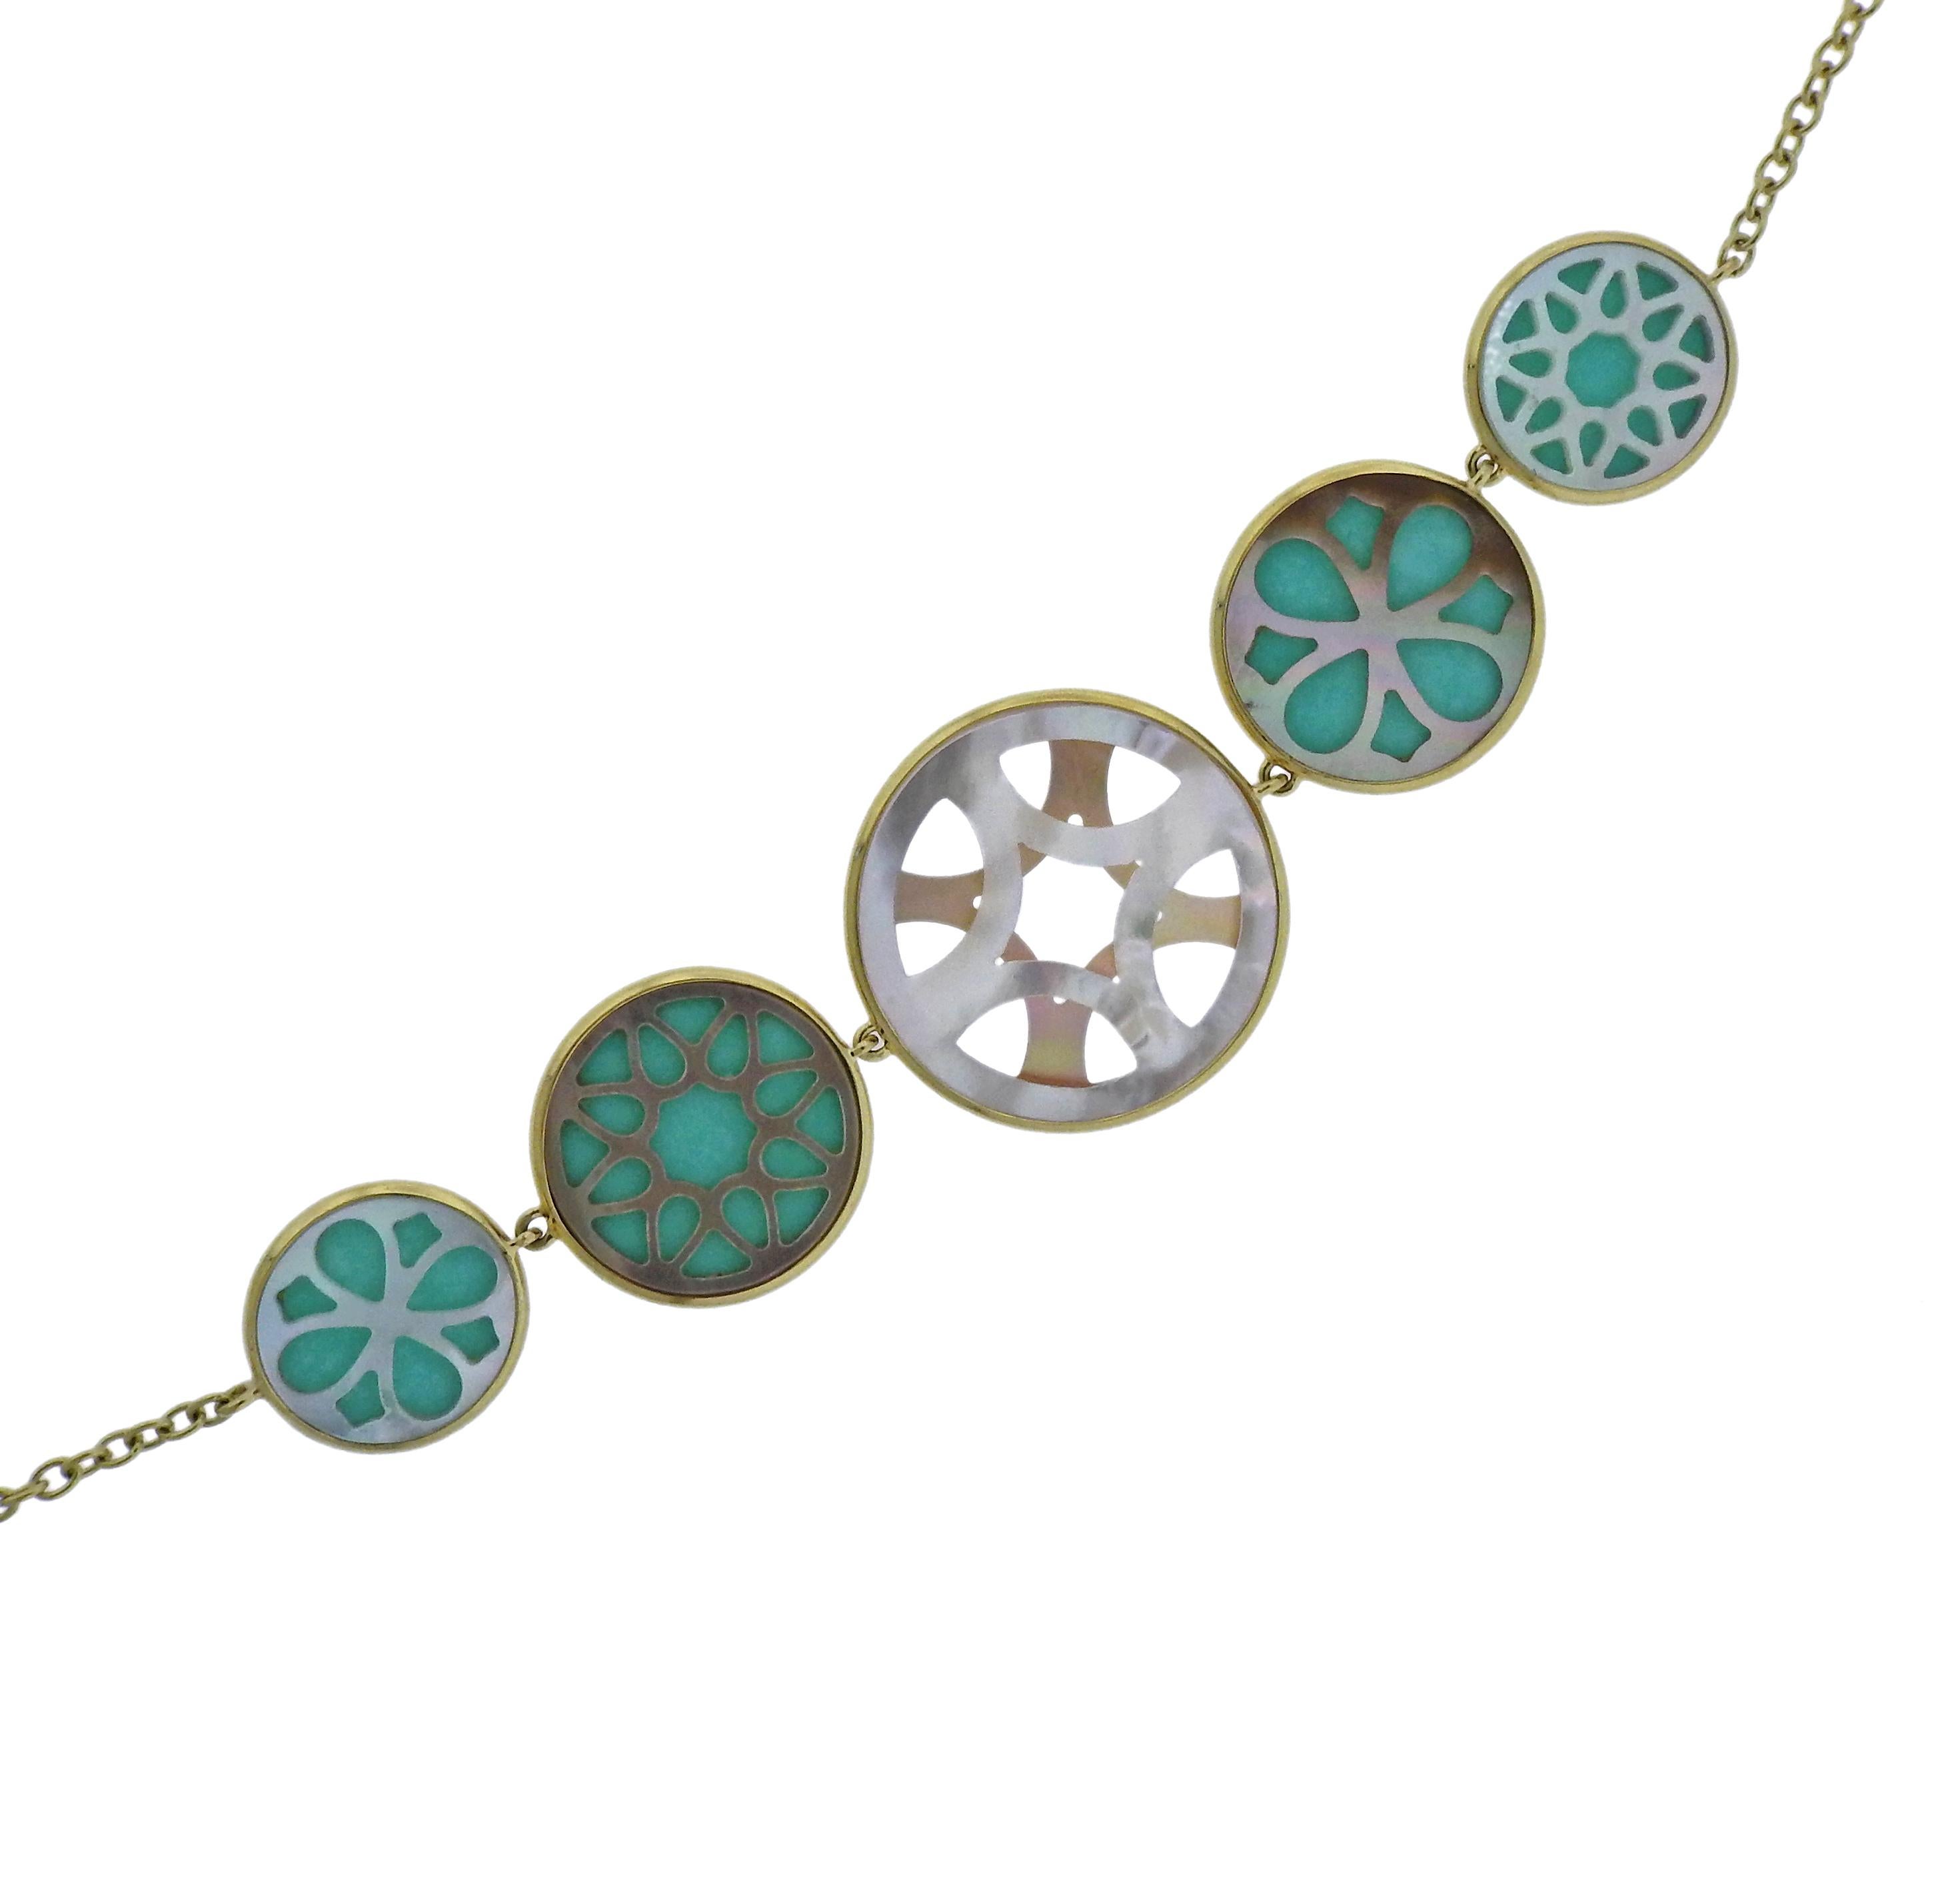 18k gold long station necklace, featuring turquoise and cut out mother of pearl.  Necklace is 38